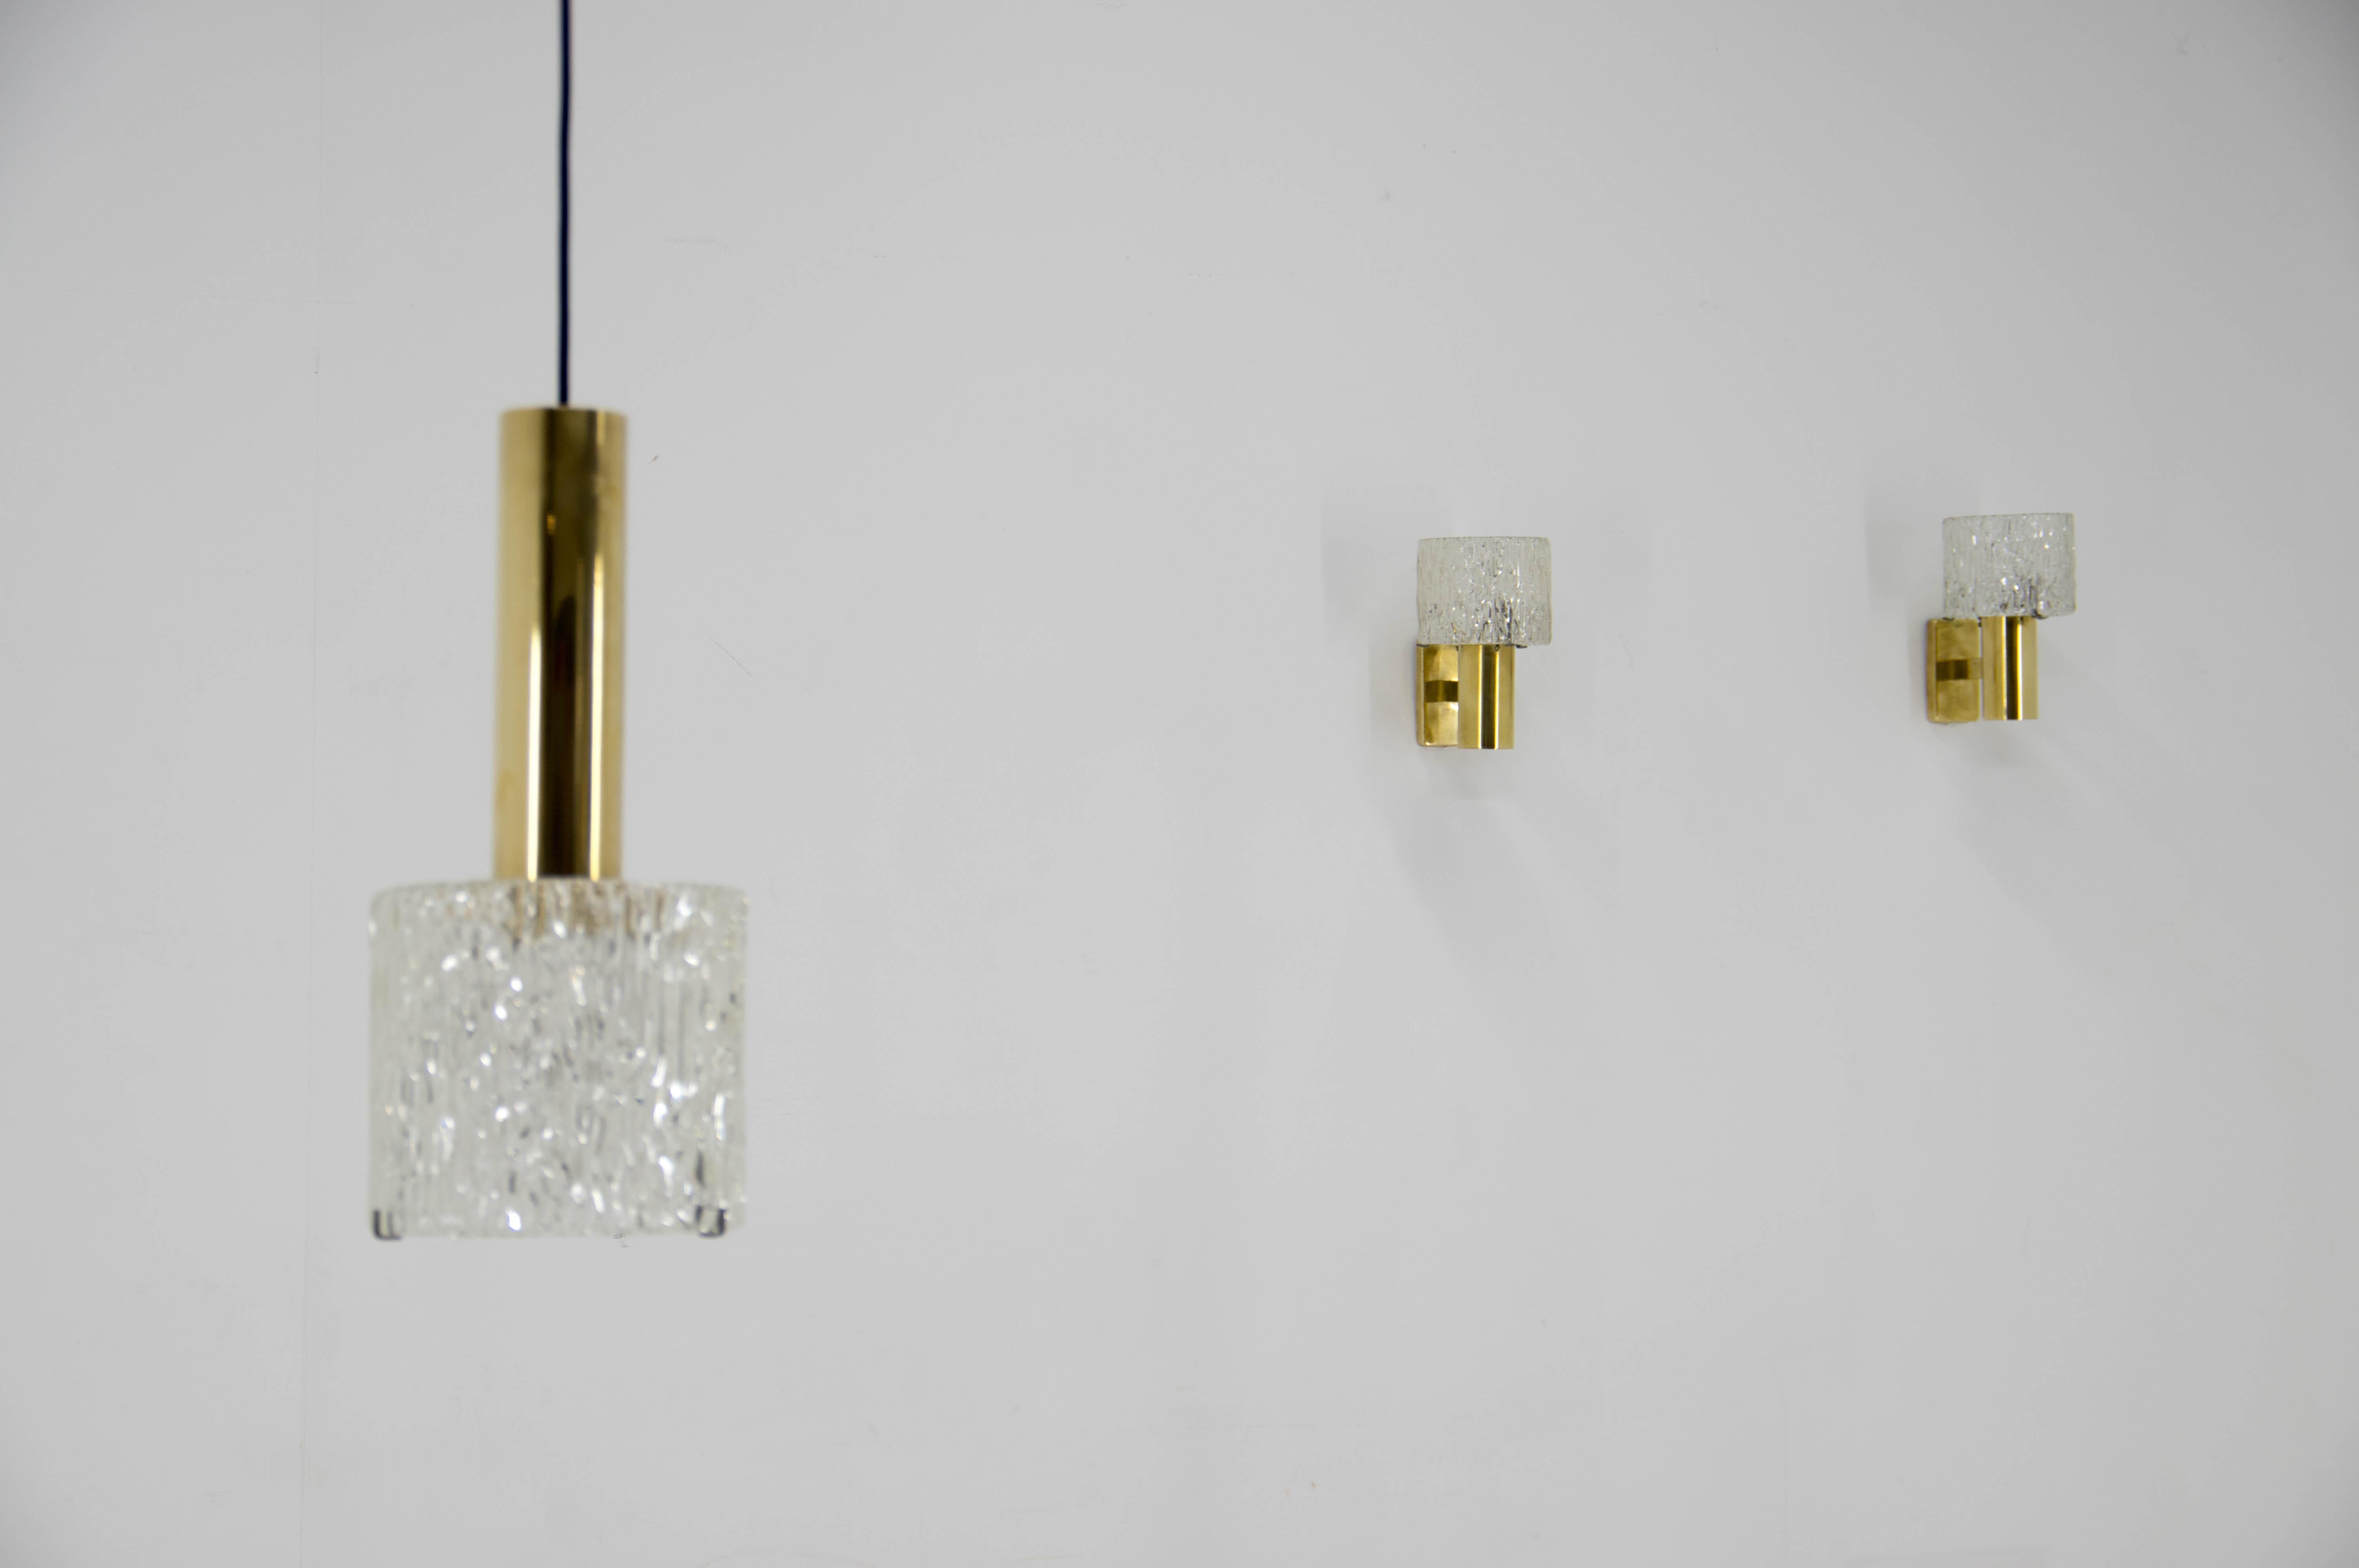 Set of pendant and two wall lamps designed by Carl Fagerlund for Orrefors in late 1950s.
Dimensions of pendant: D: 18cm, H: up to 106cm
Perfect condition, polished, rewired: 40W, E25-E27 bulbs
US wiring compatible

About the designer:
Swedish glass